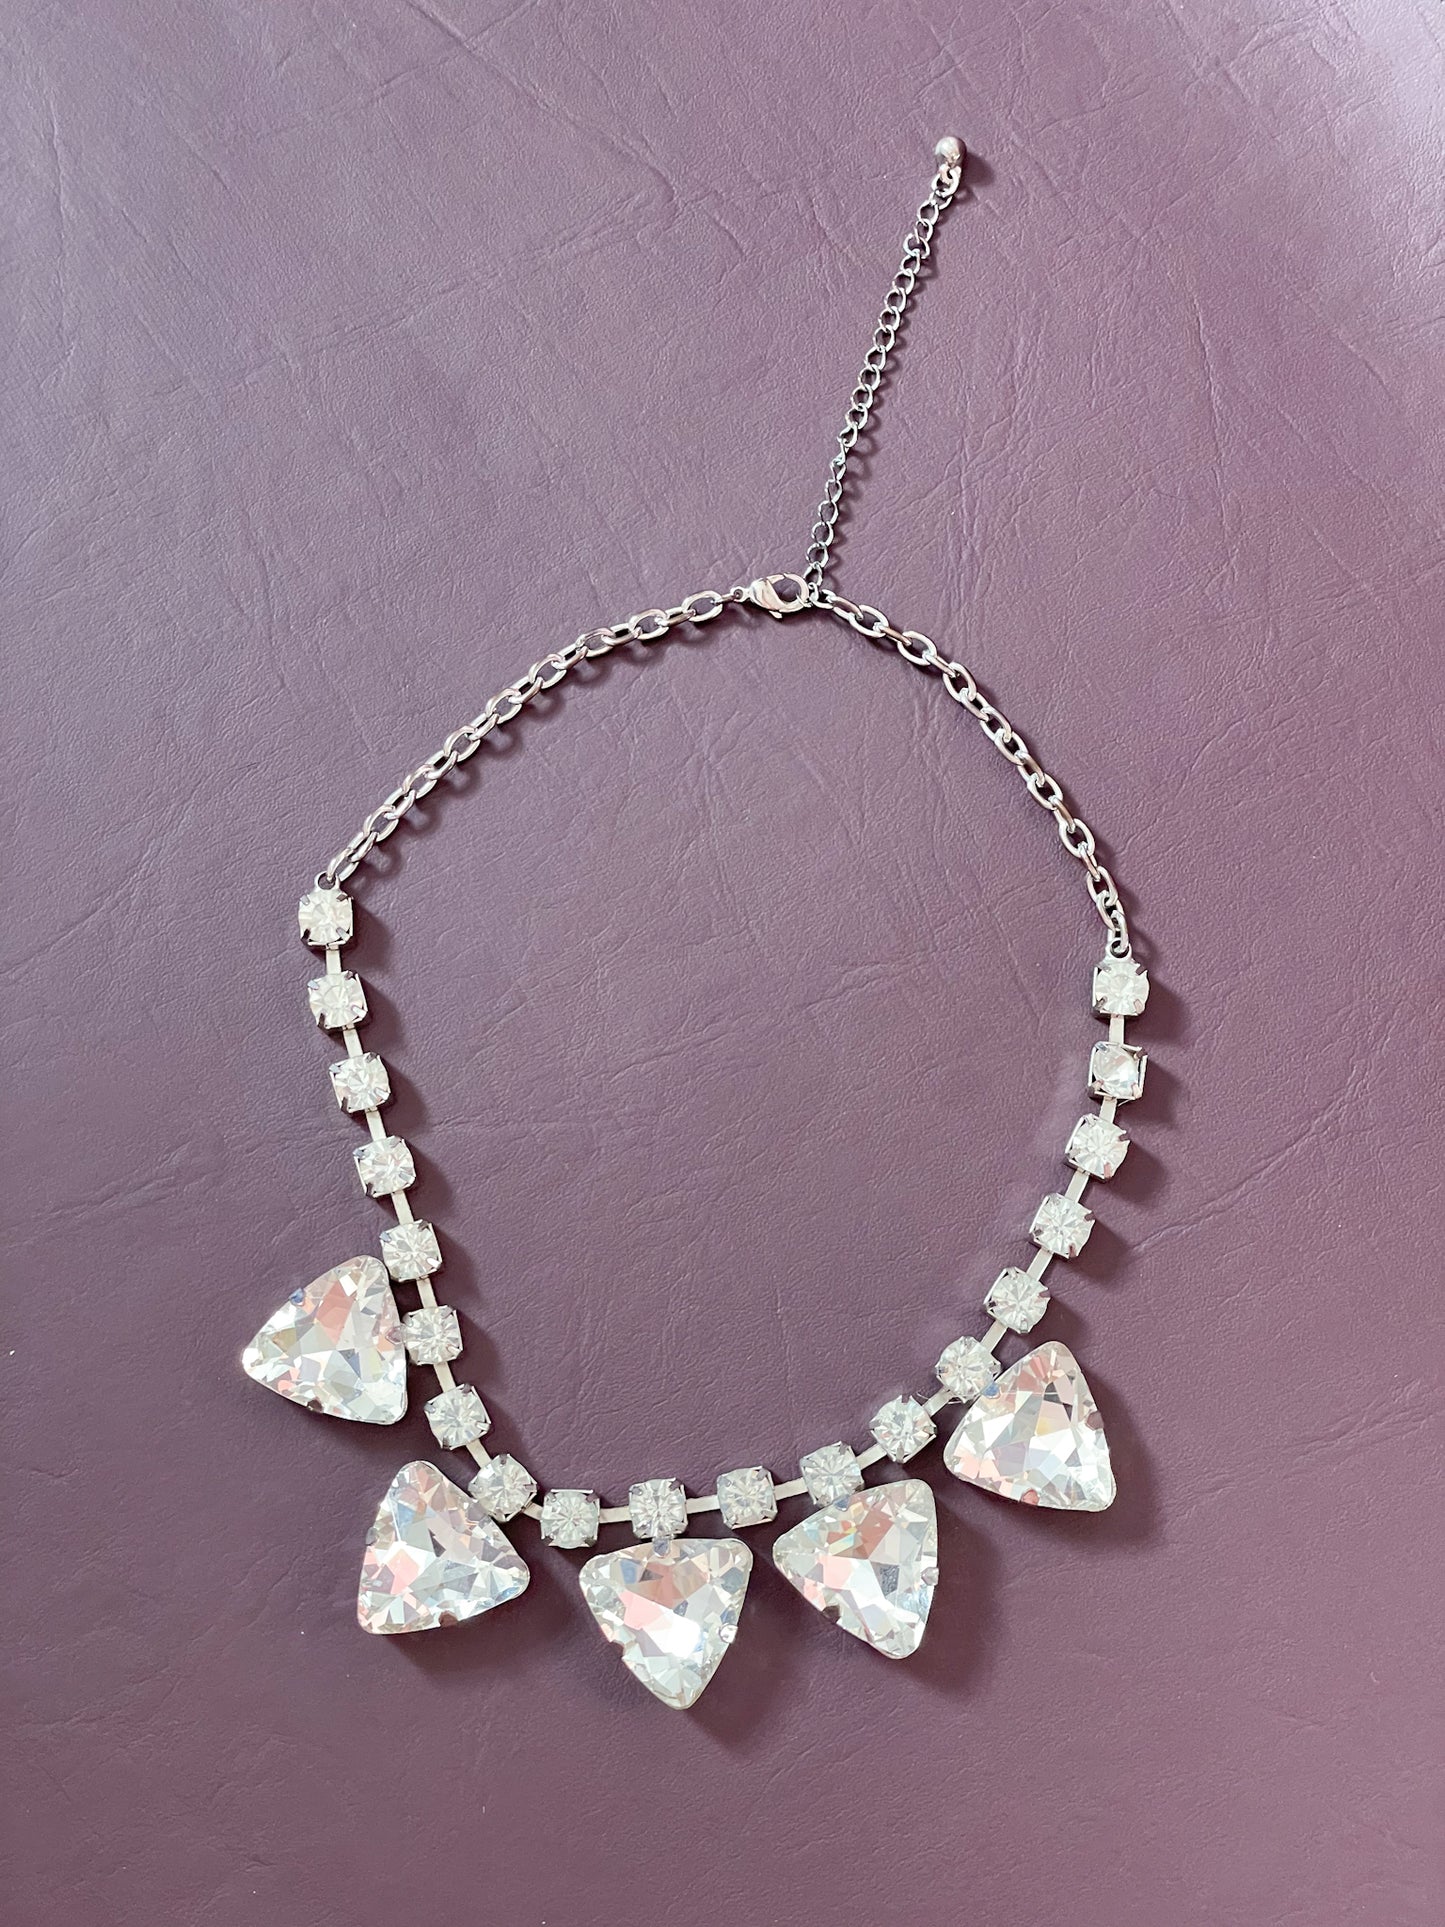 Crystal Sparkly Statement Necklace